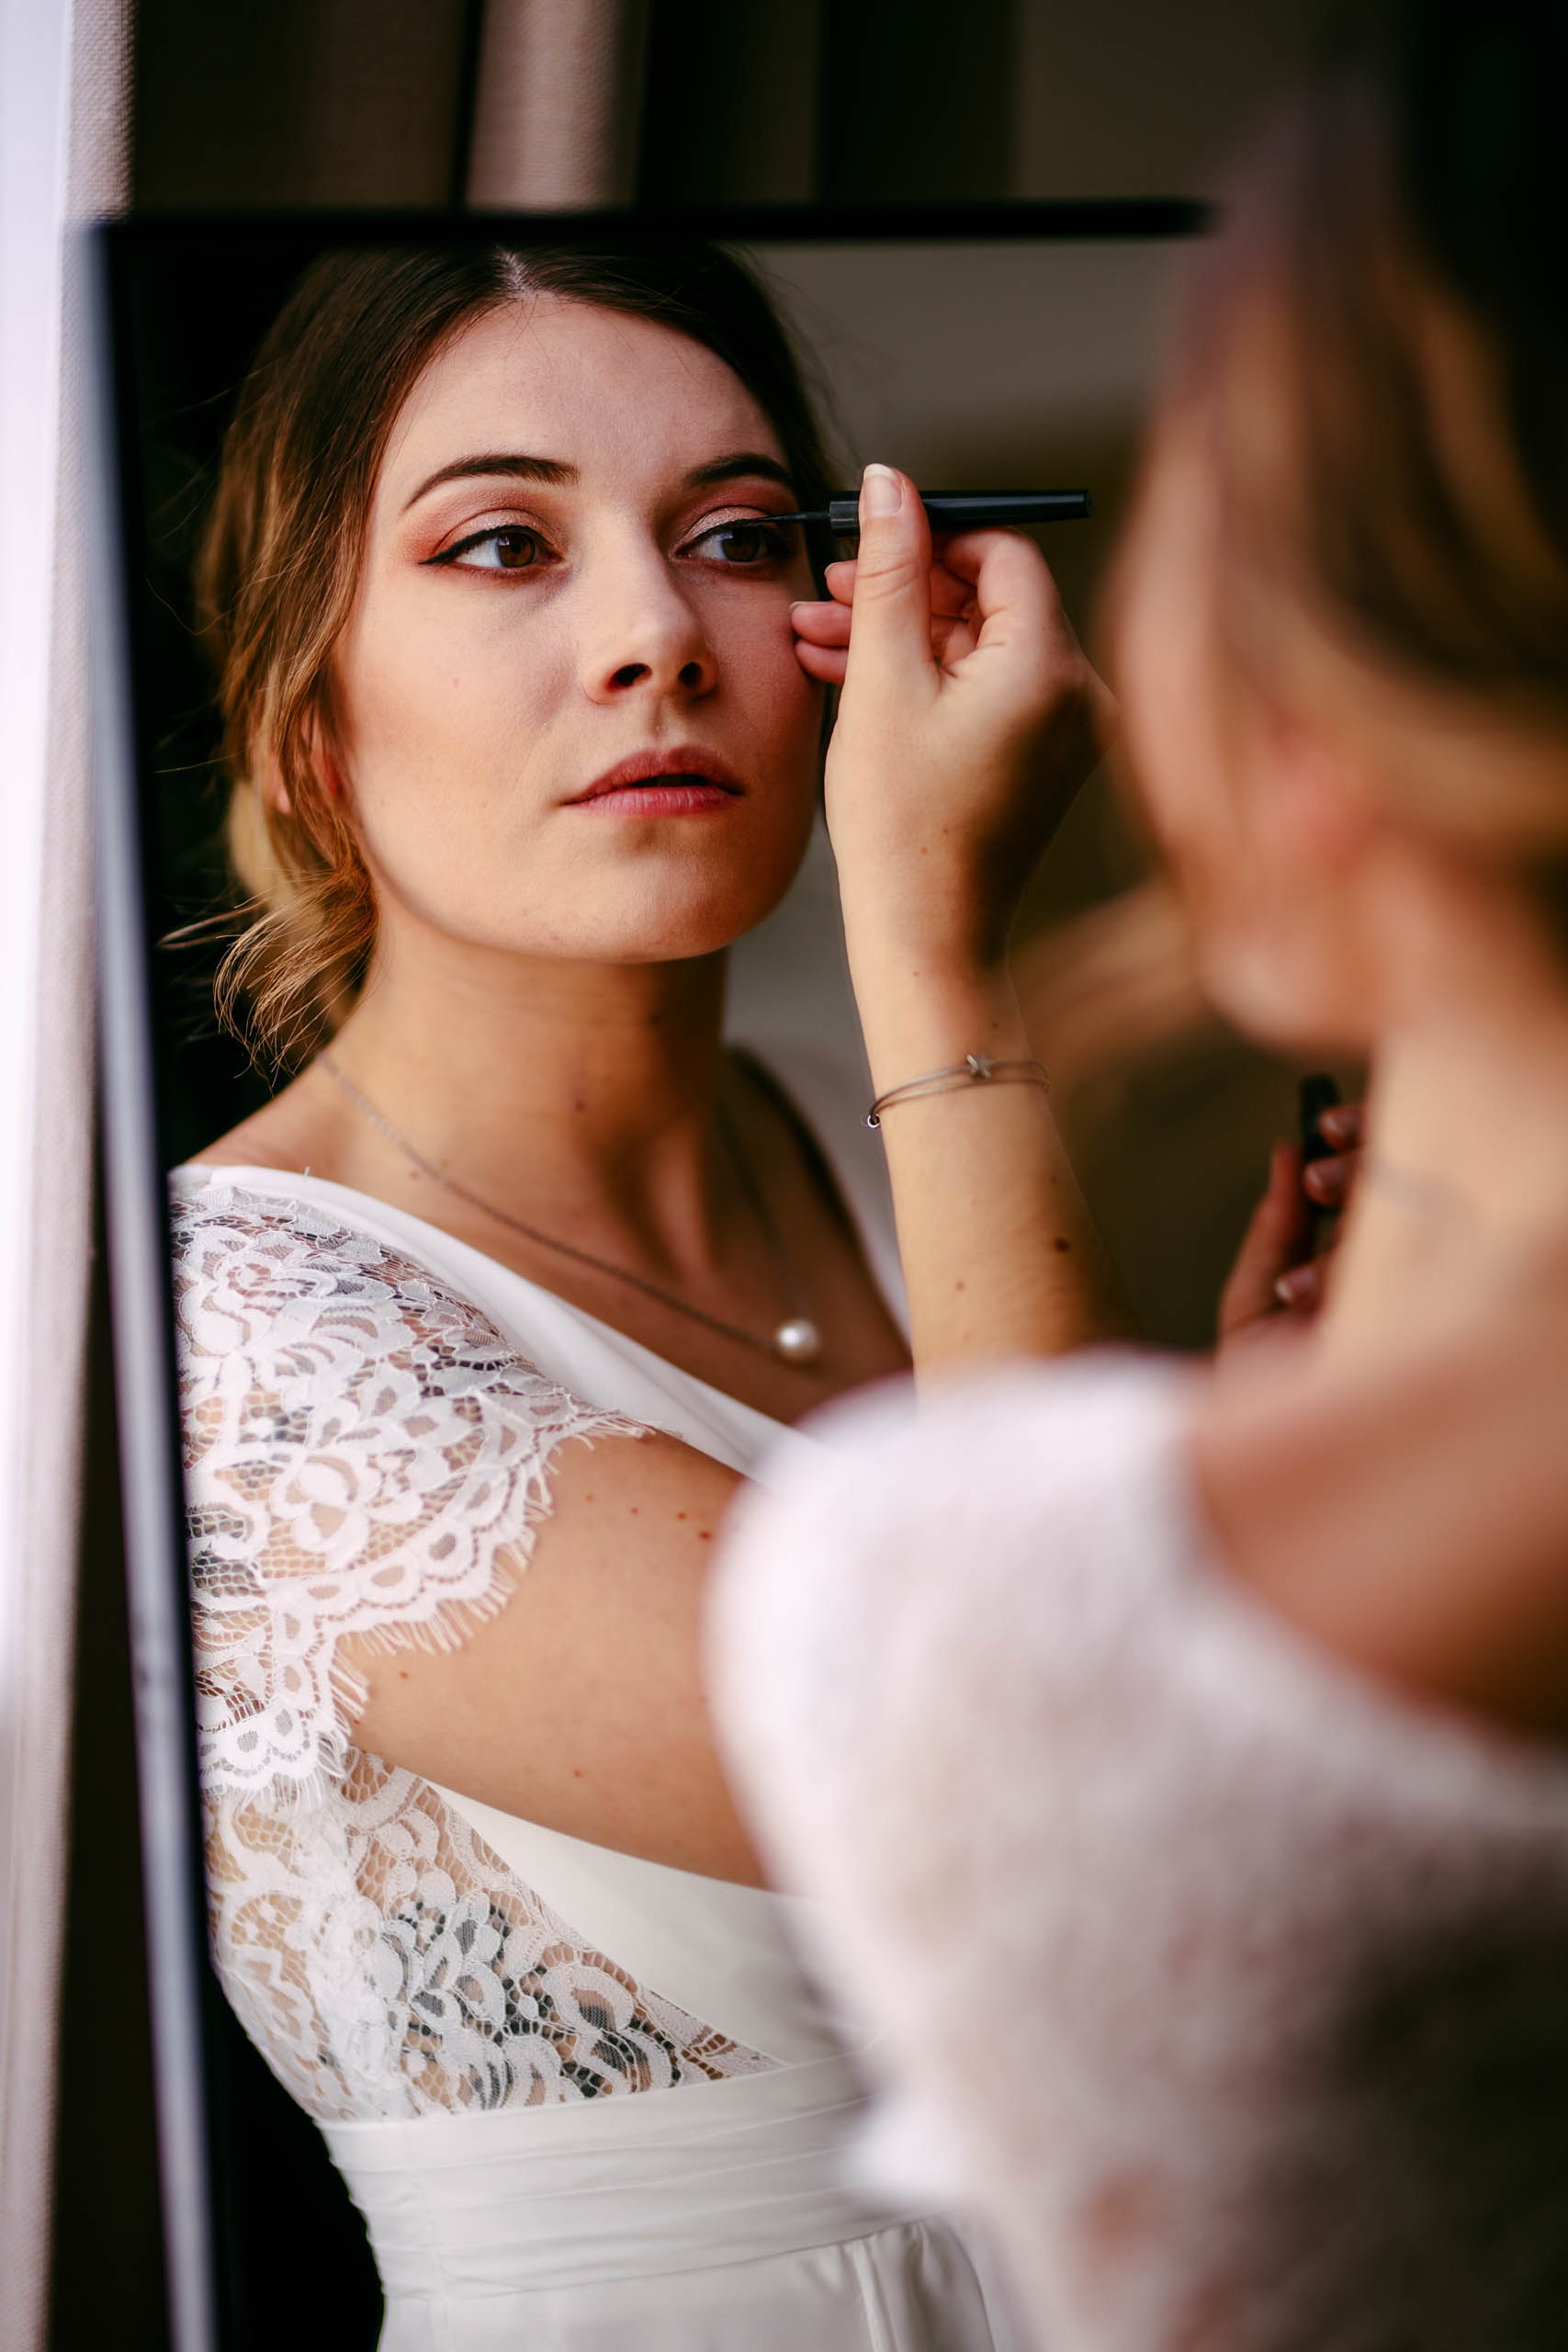 A bride gets her make-up done in front of a boudoir-shooting mirror.